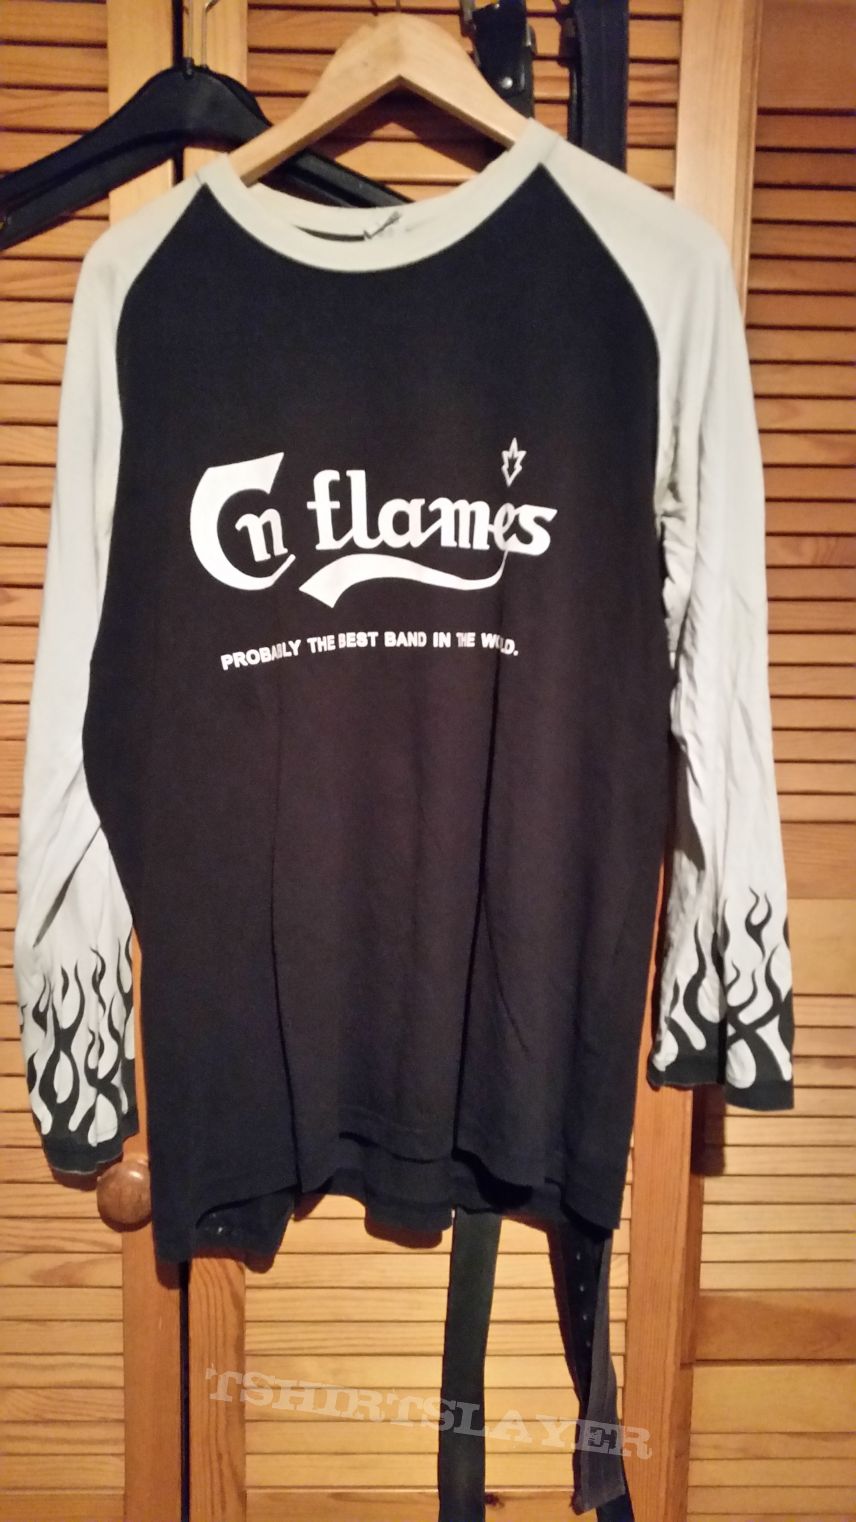 In Flames - probably the best band in the world / carlsberg Longsleeve 